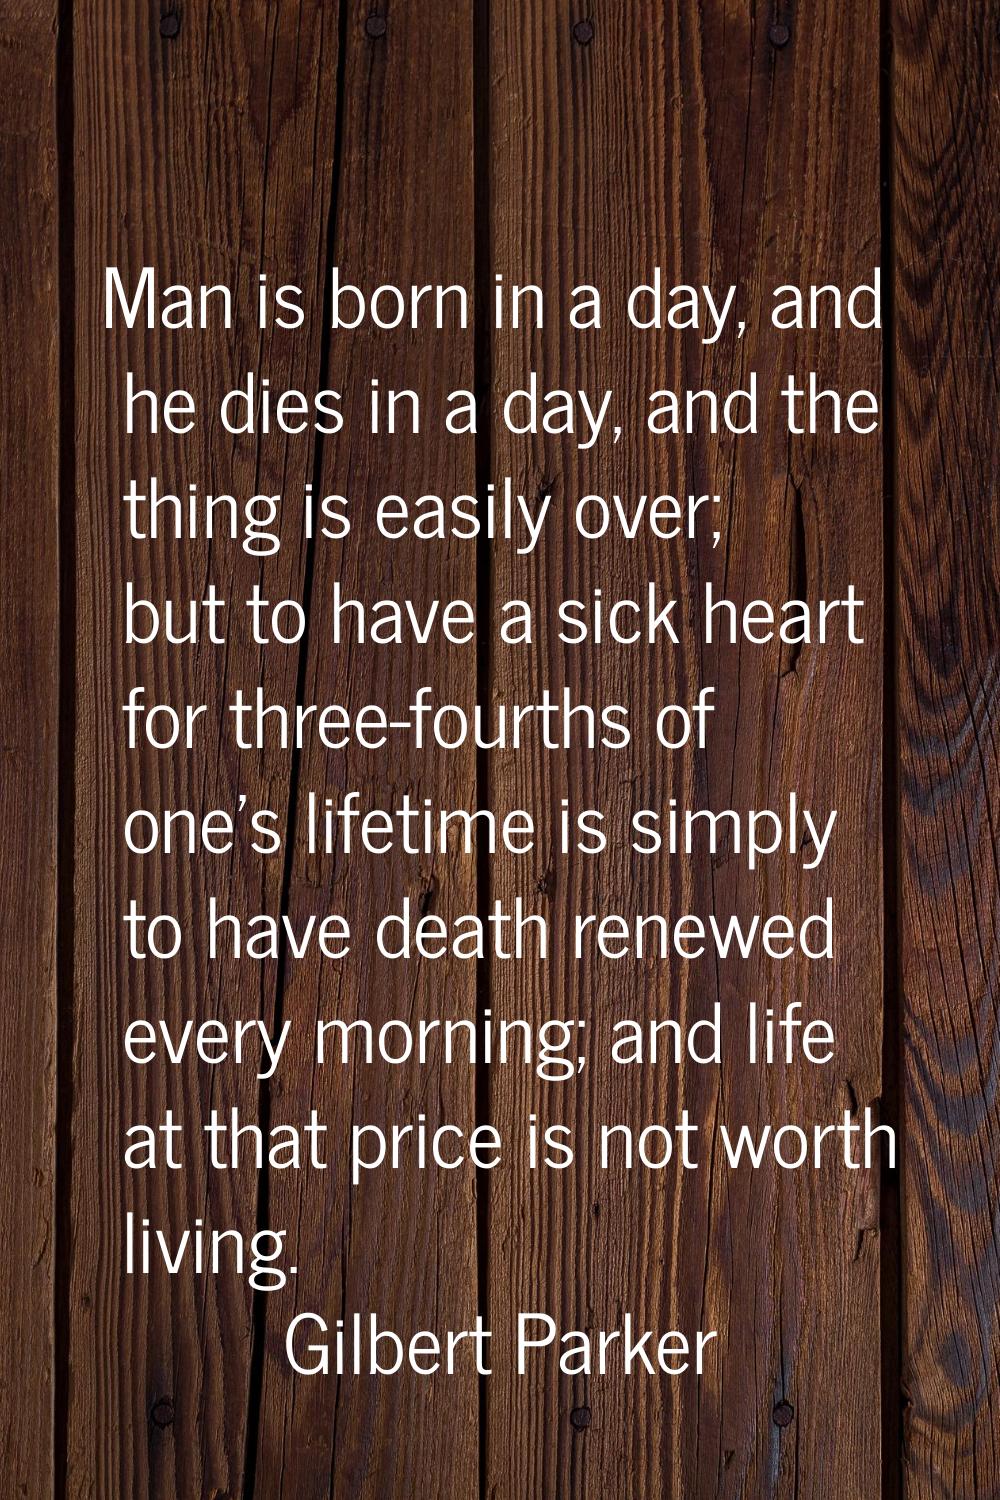 Man is born in a day, and he dies in a day, and the thing is easily over; but to have a sick heart 